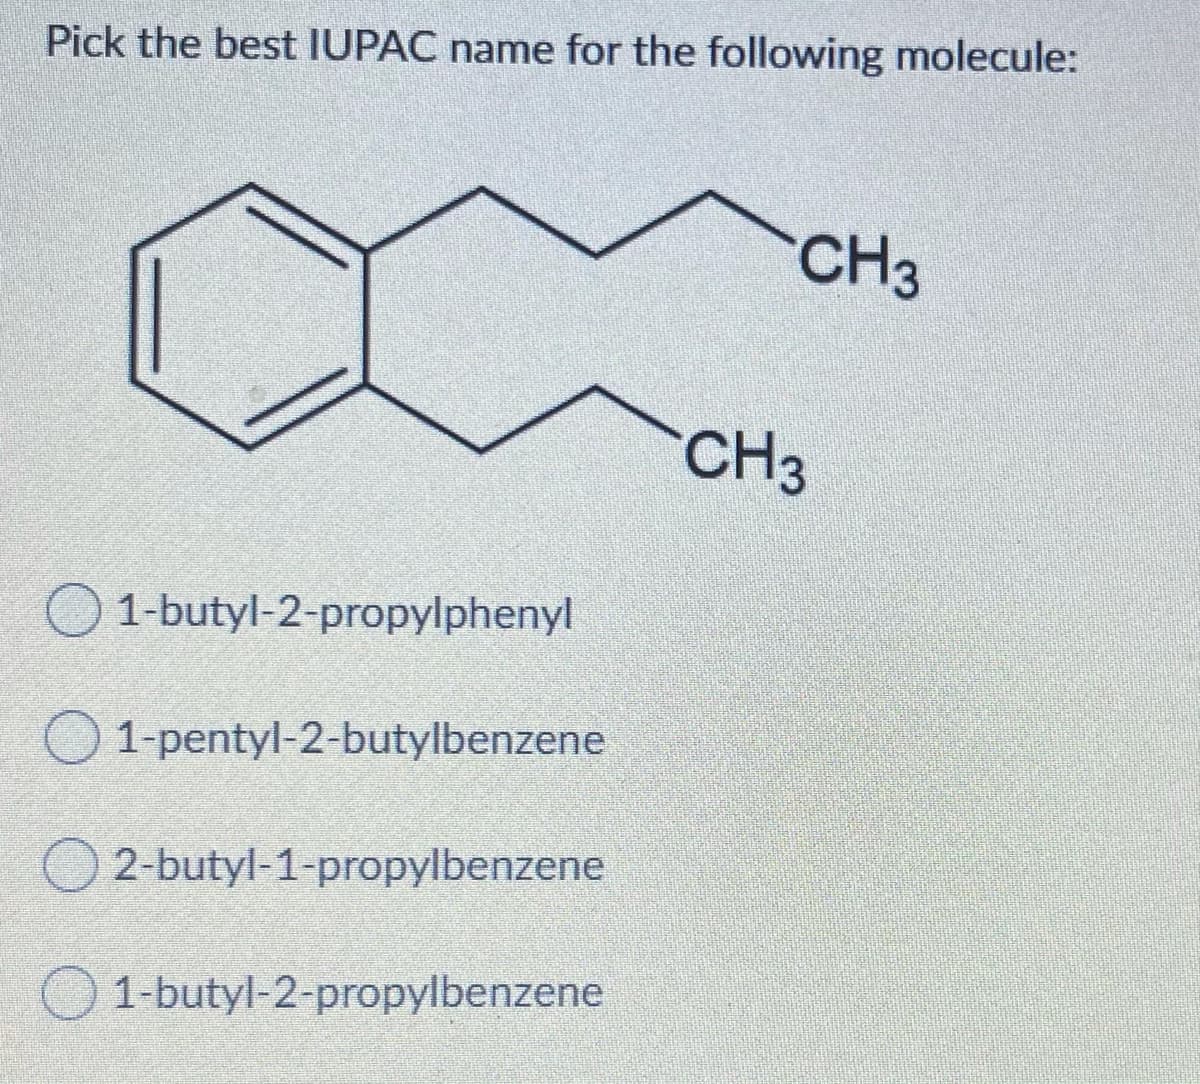 Pick the best IUPAC name for the following molecule:
CH3
CH3
O 1-butyl-2-propylphenyl
1-pentyl-2-butylbenzene
O 2-butyl-1-propylbenzene
O 1-butyl-2-propylbenzene
